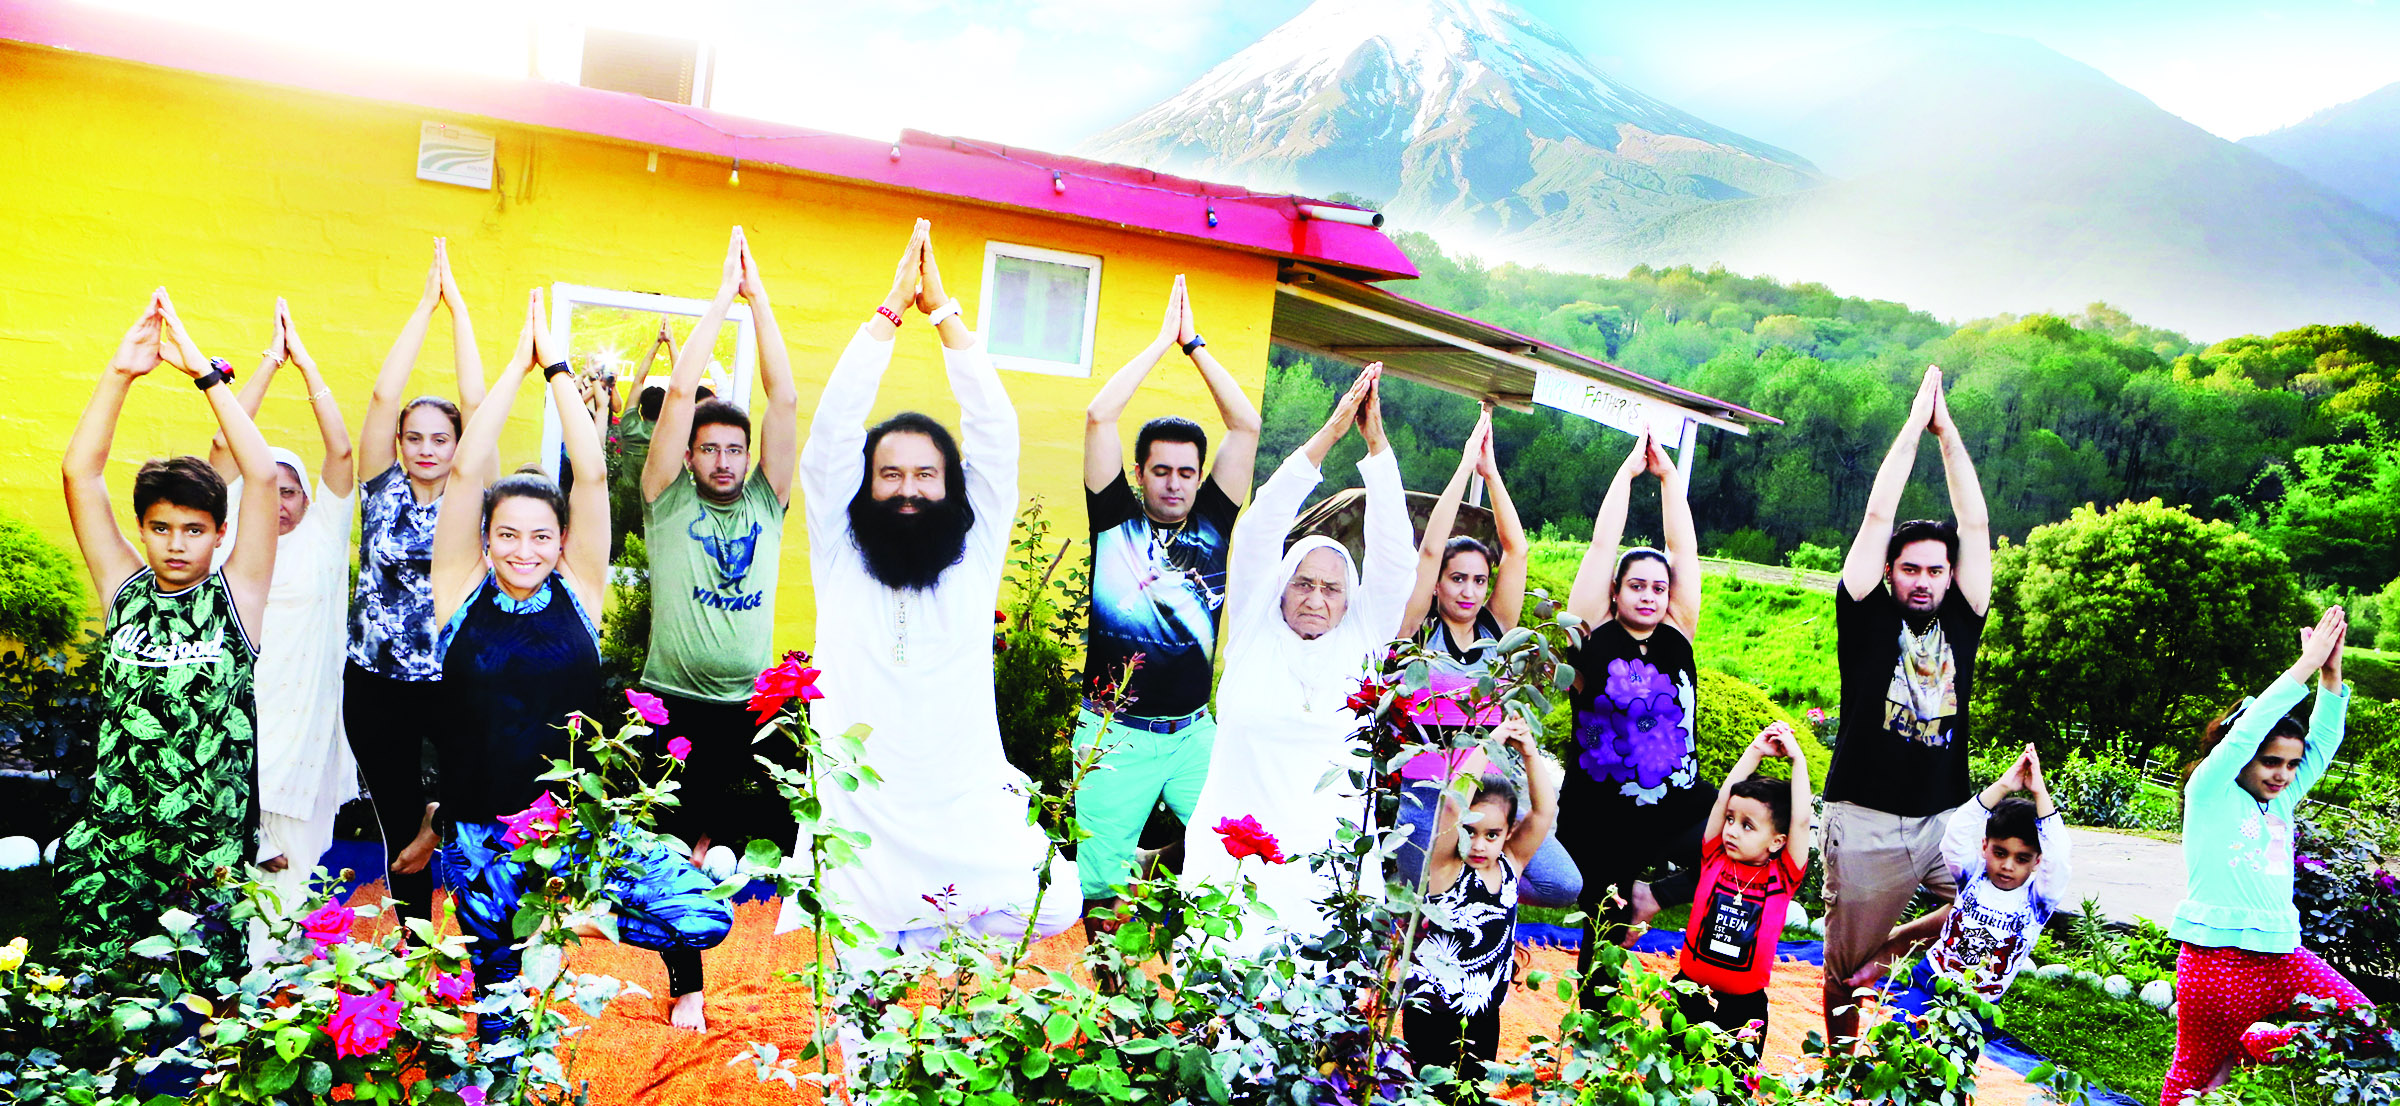 word yoga day:dr msg with his family